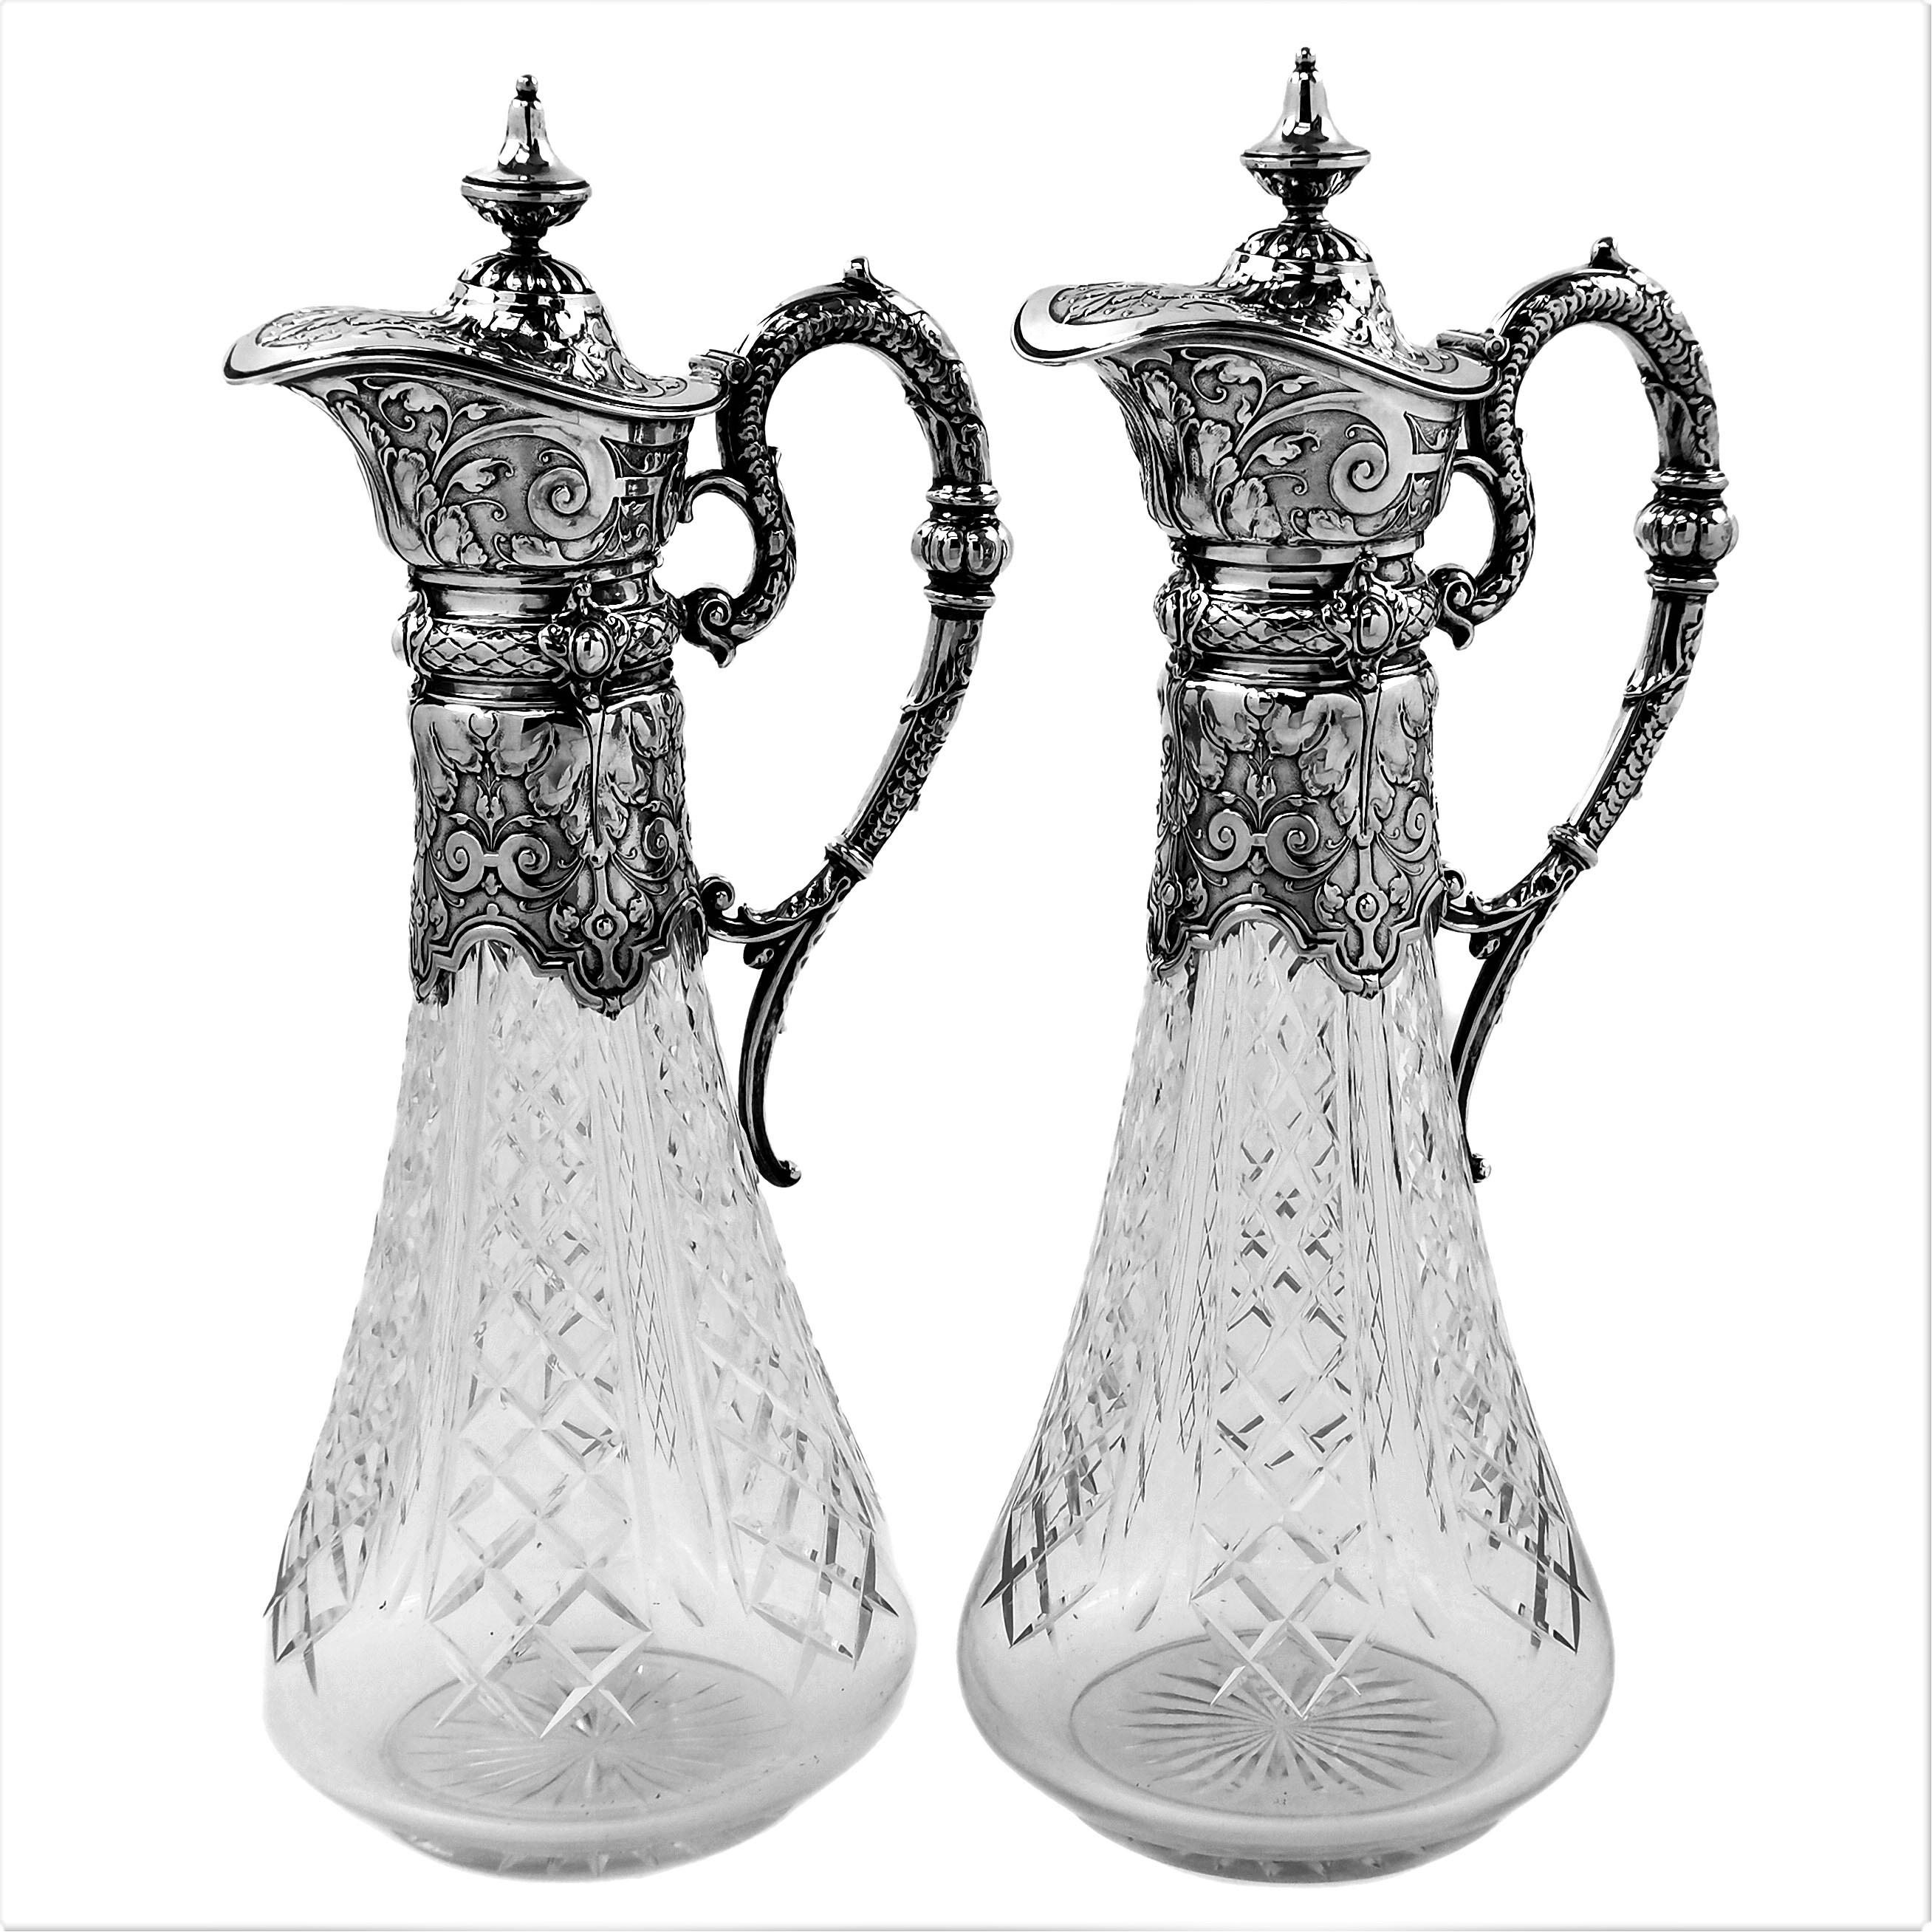 19th Century Pair of Antique German Silver and Cut Glass Claret Jugs Wine Decanters c 1890